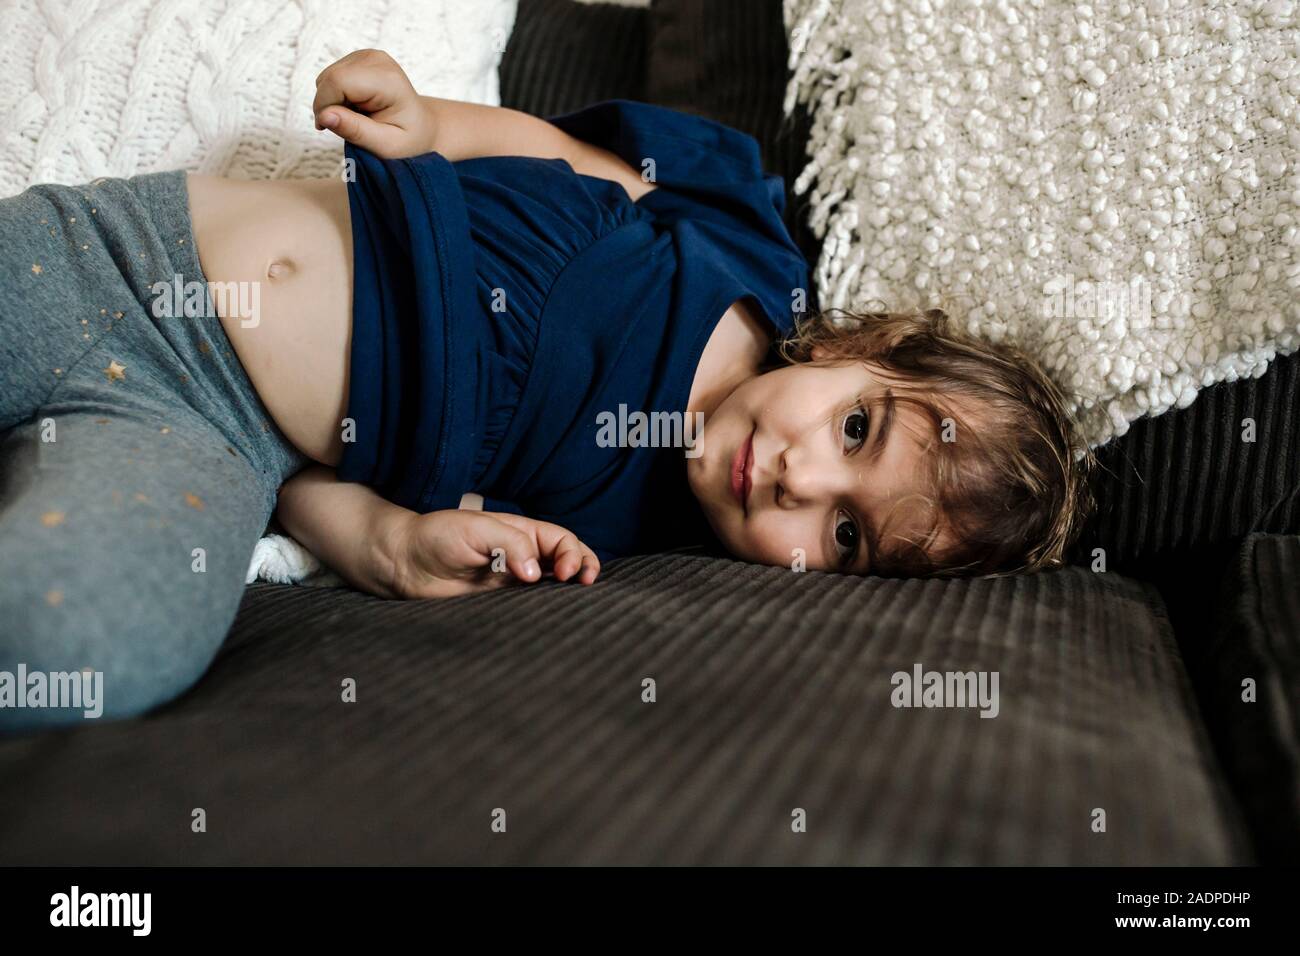 4 yr old girl lying on couch with belly showing Stock Photo